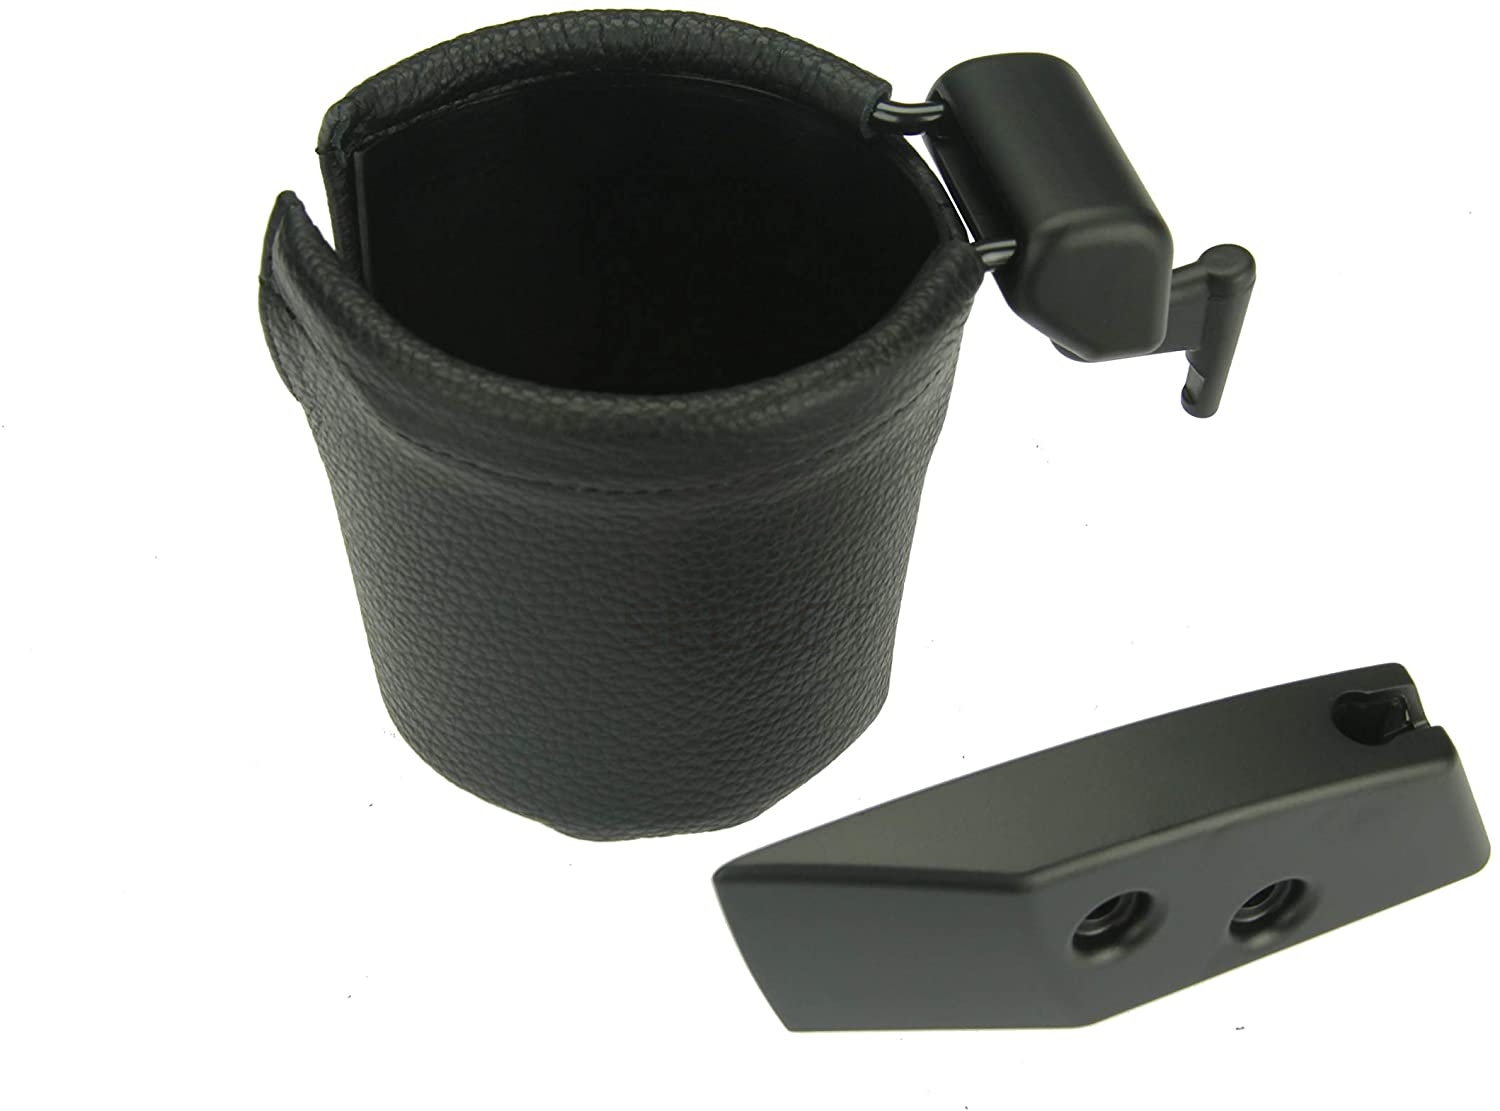 CUP HOLDER